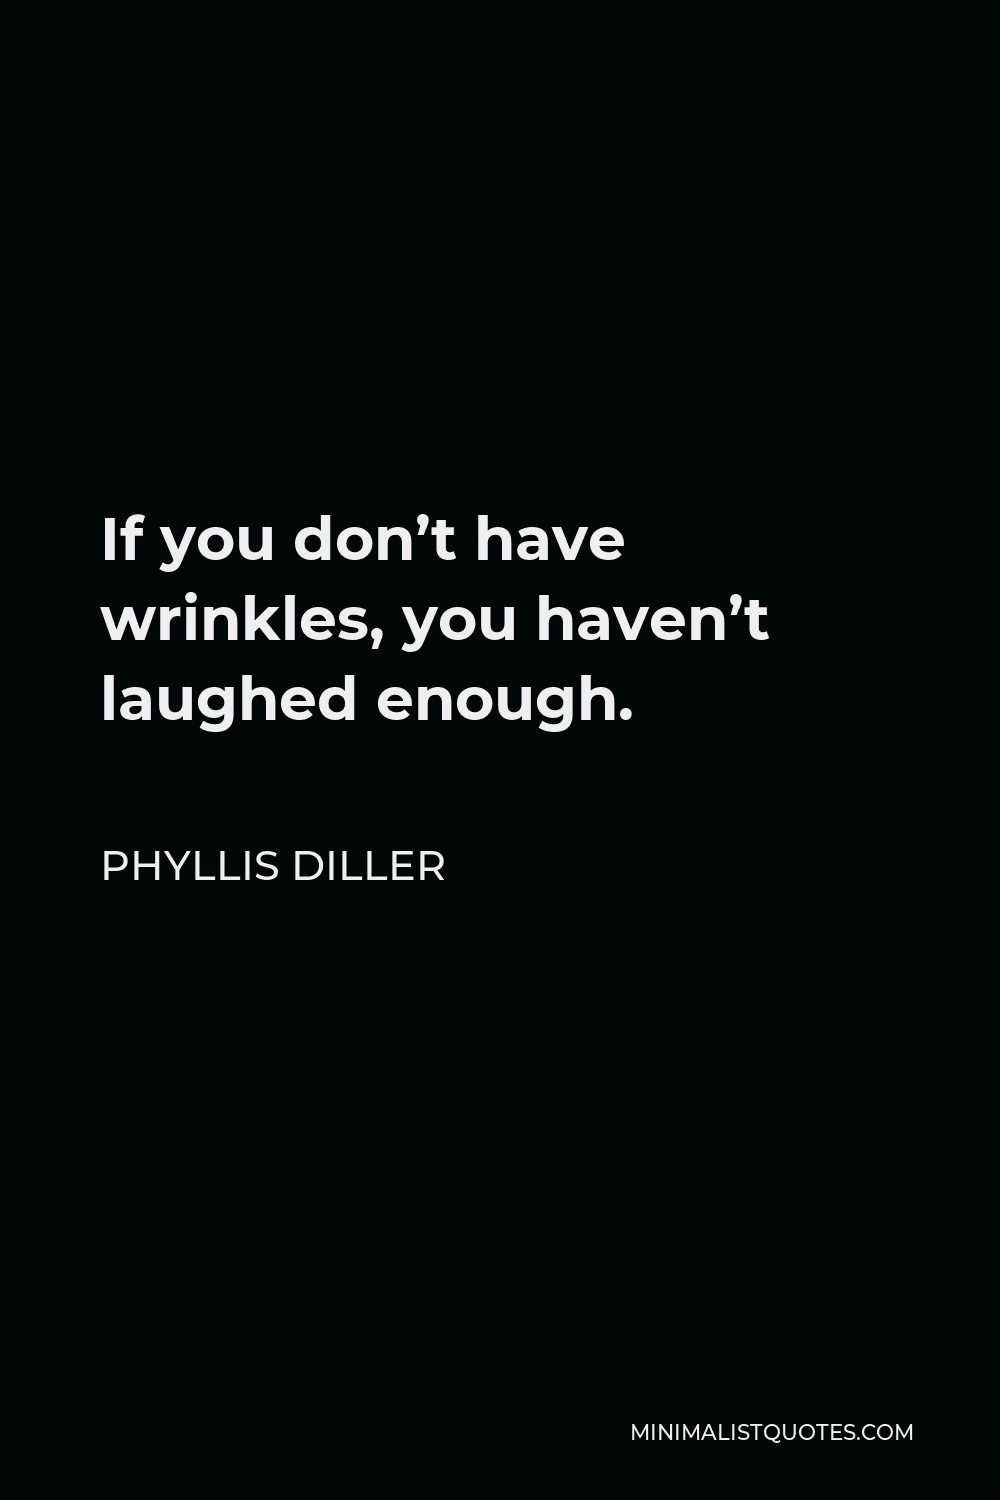 Phyllis Diller Quote - If you don’t have wrinkles, you haven’t laughed enough.